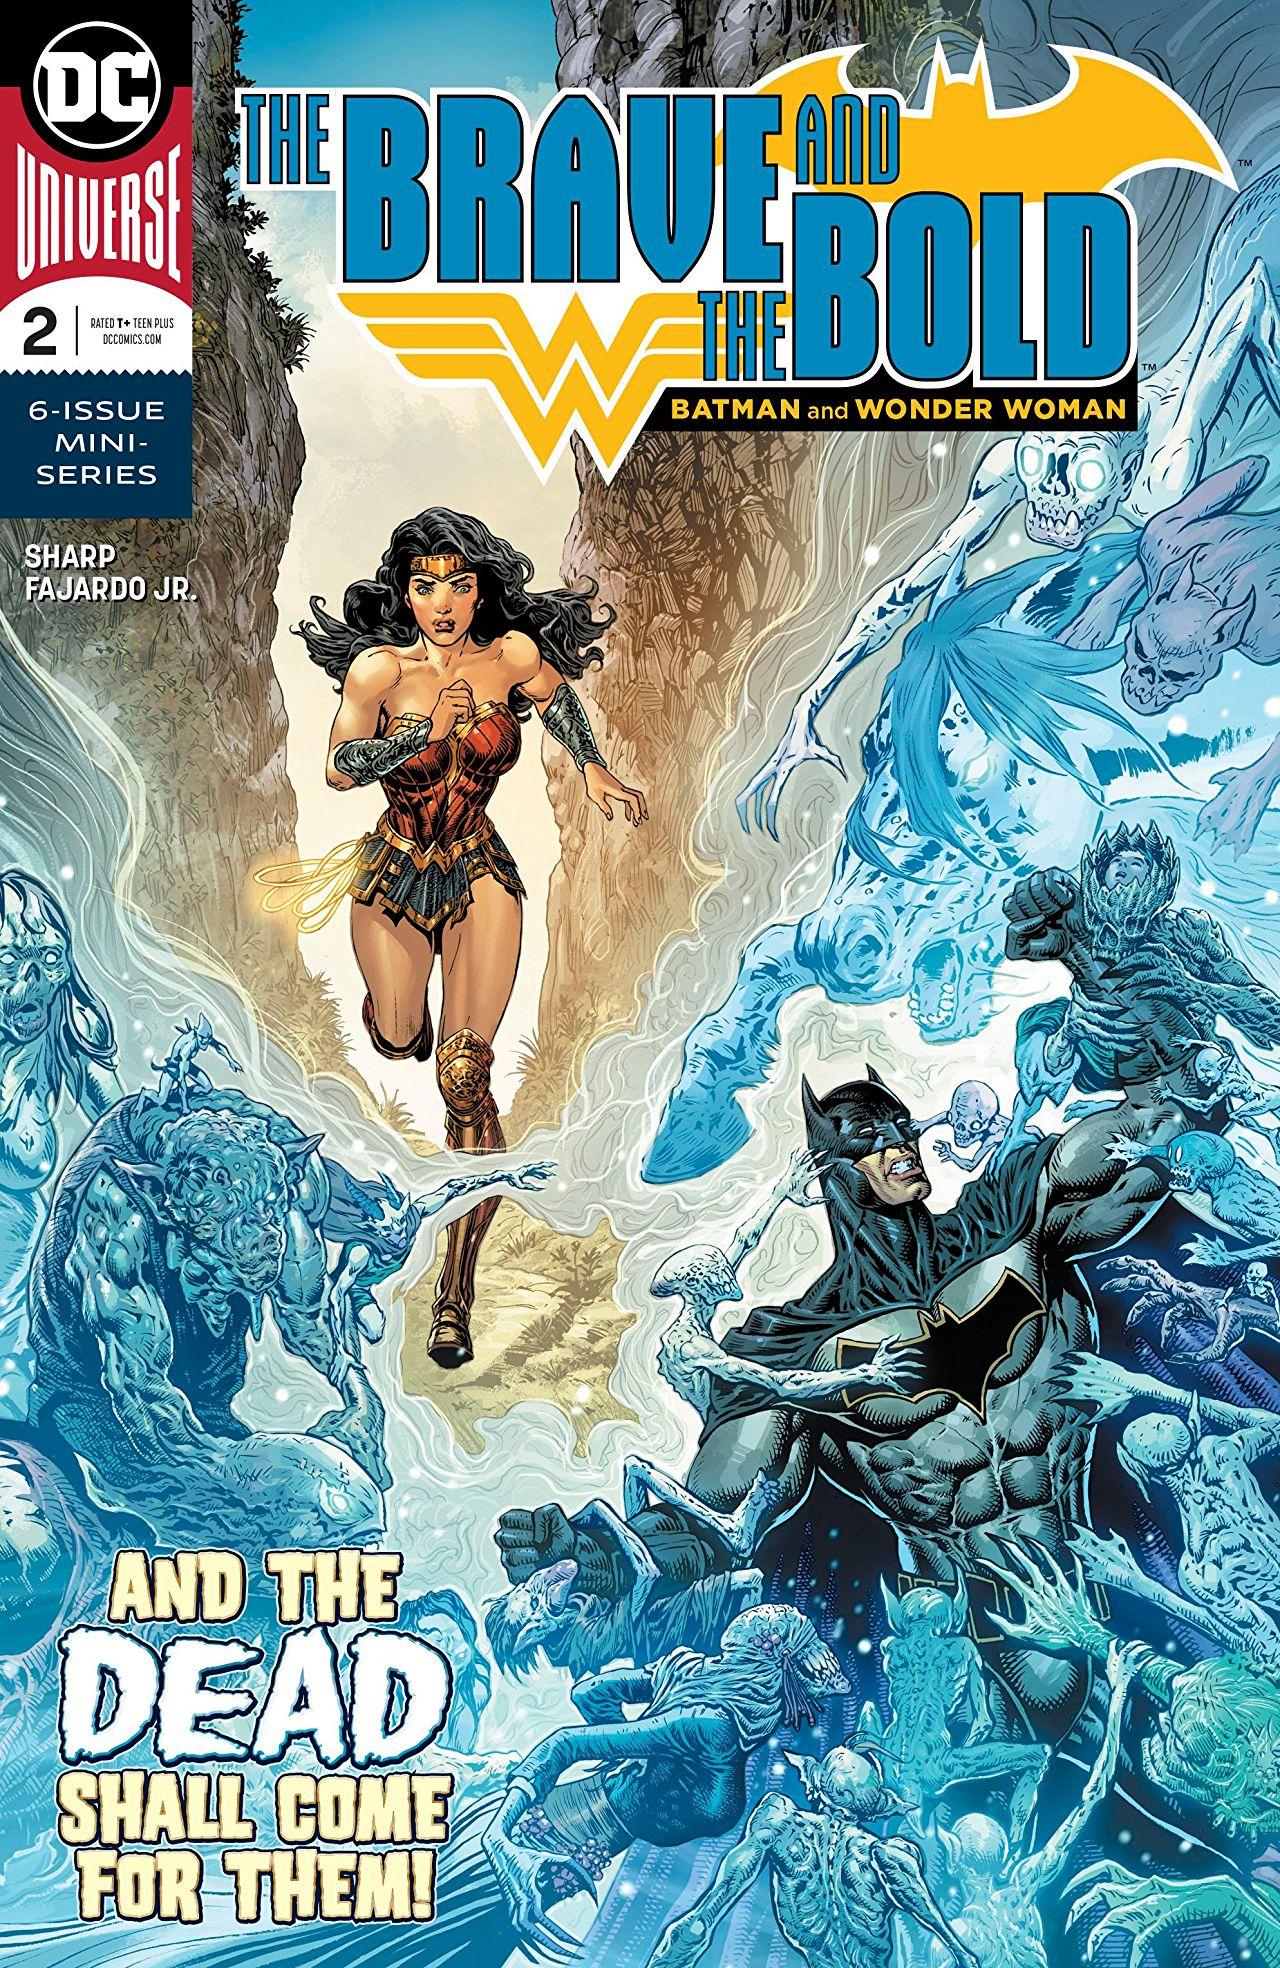 The Brave and the Bold: Batman and Wonder Woman Vol. 1 #2